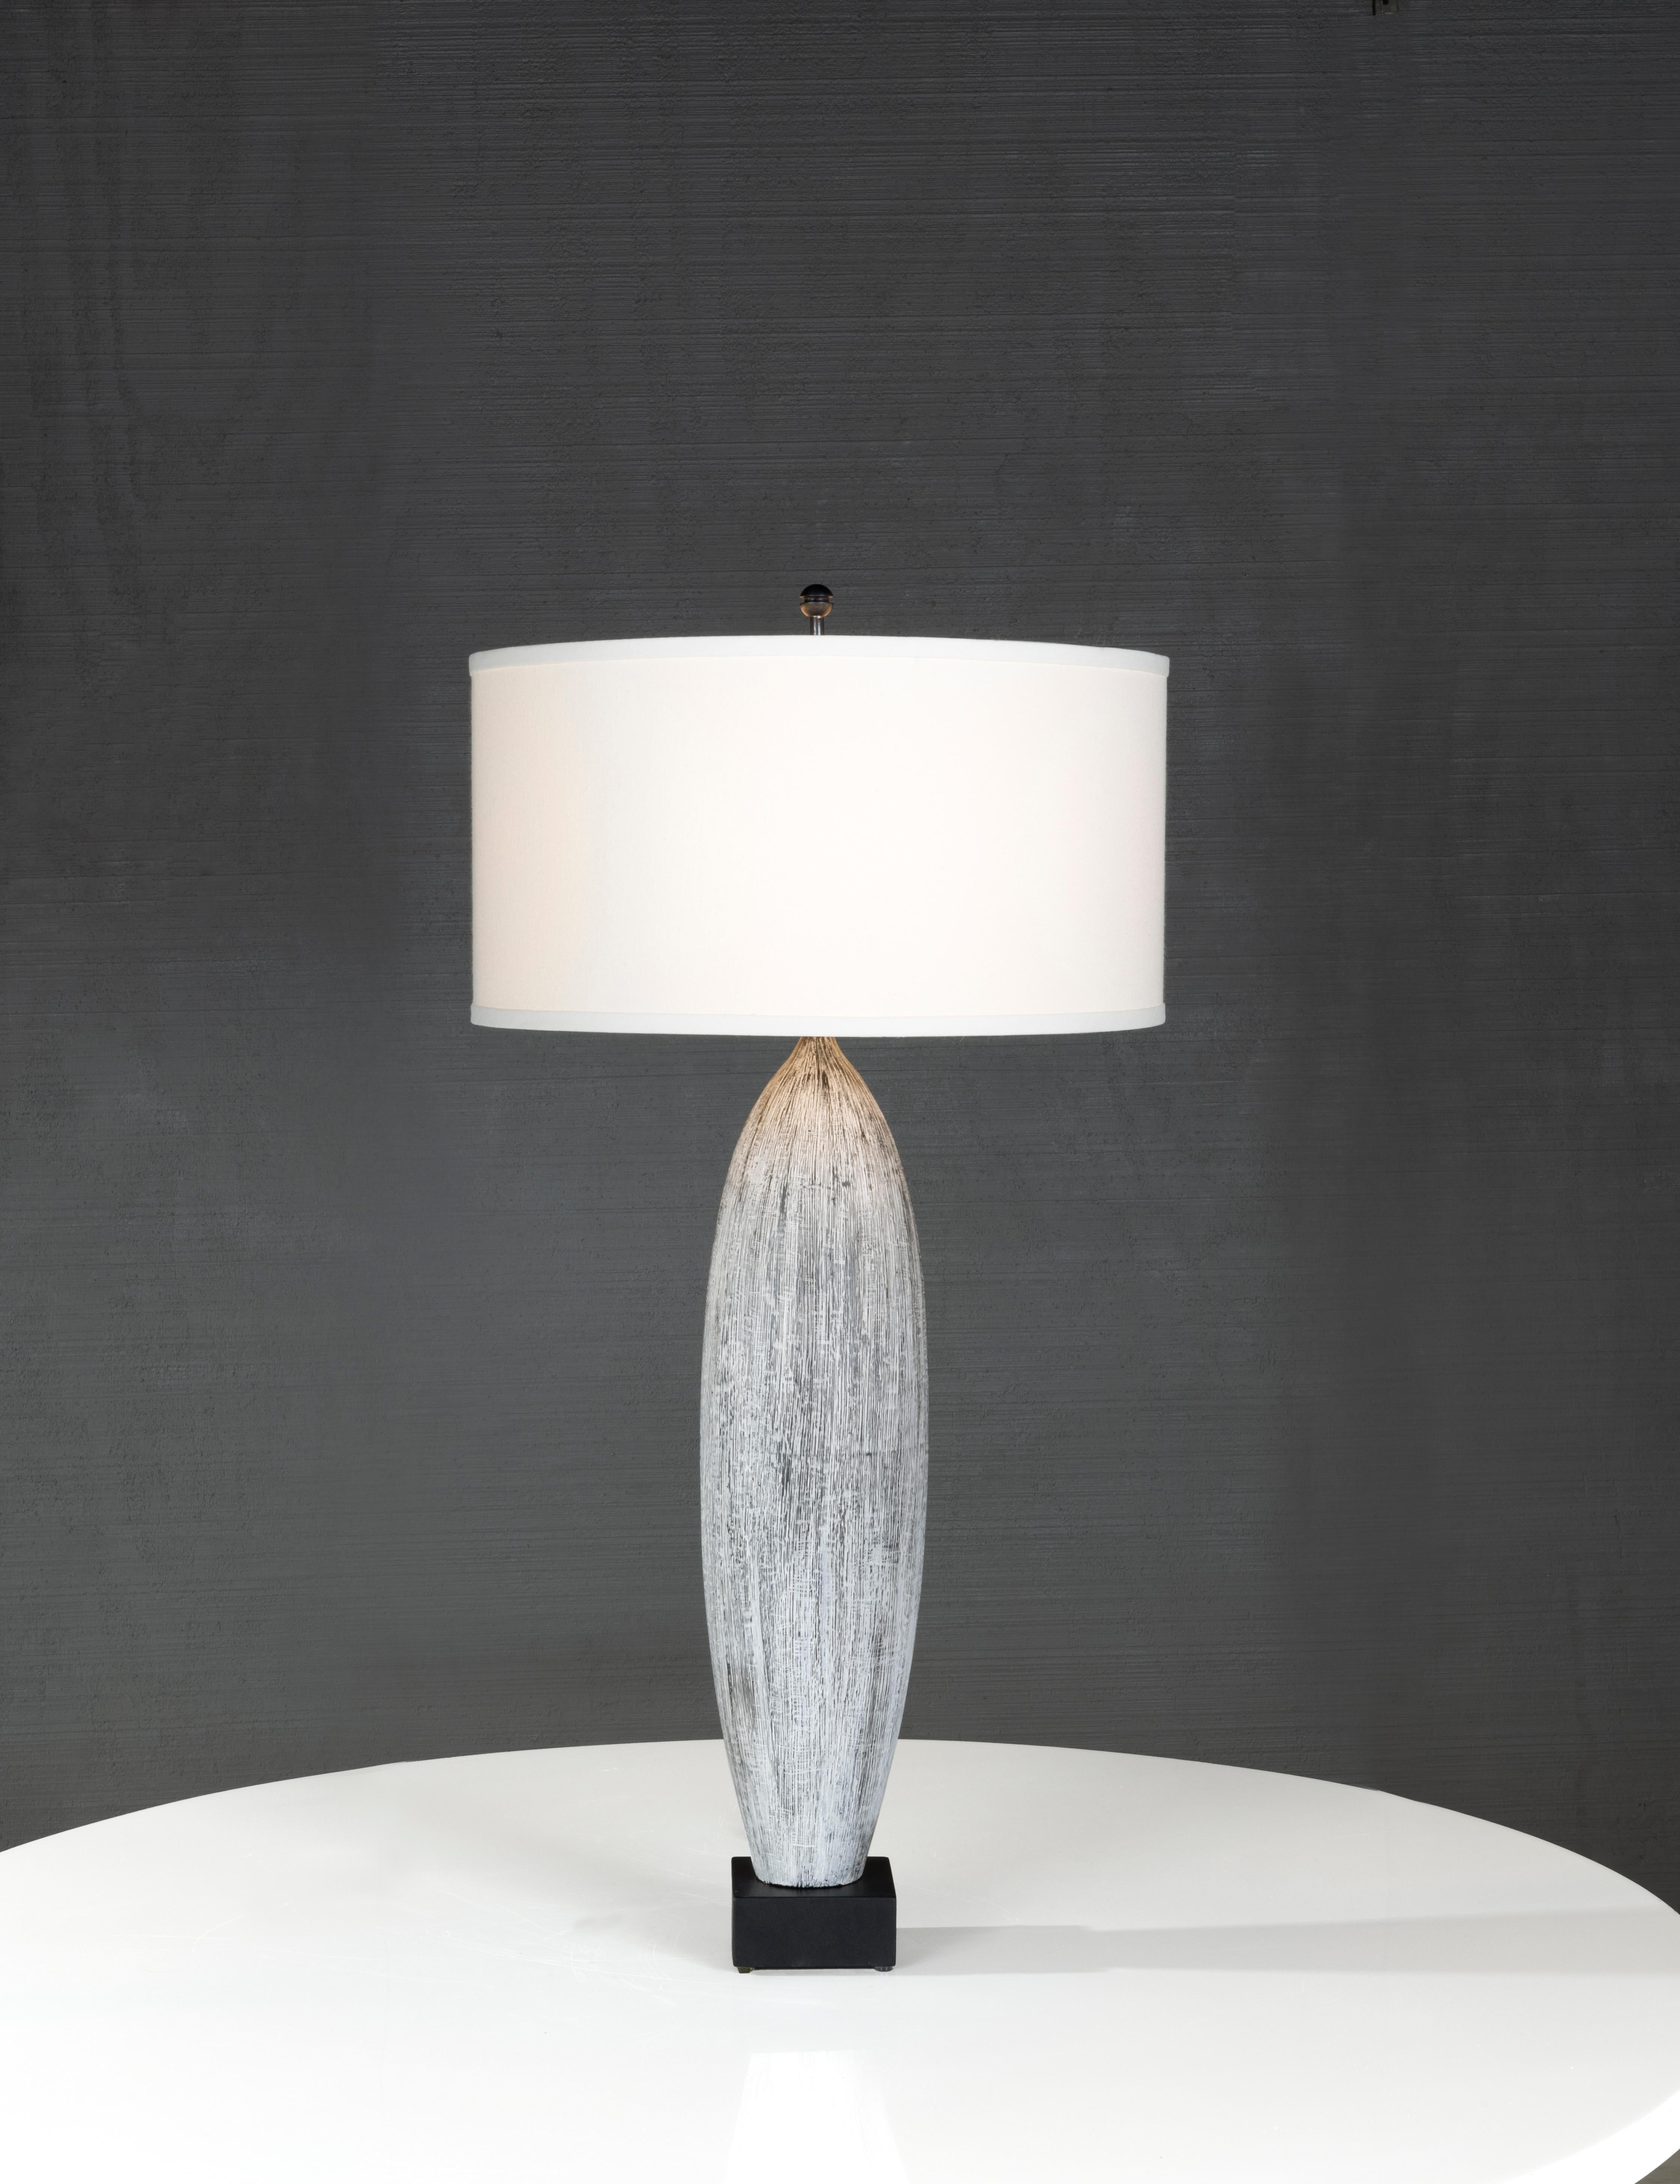 Part of our Reng lighting line. Beauty has always lived in the details, and this lamp is no exception. This ceramic table lamp is crafted with, Matte Glaze Ceramic, Bottle Jar Lamp with Japanese Ink Stick Decoration on Wood Mount. With an infinite